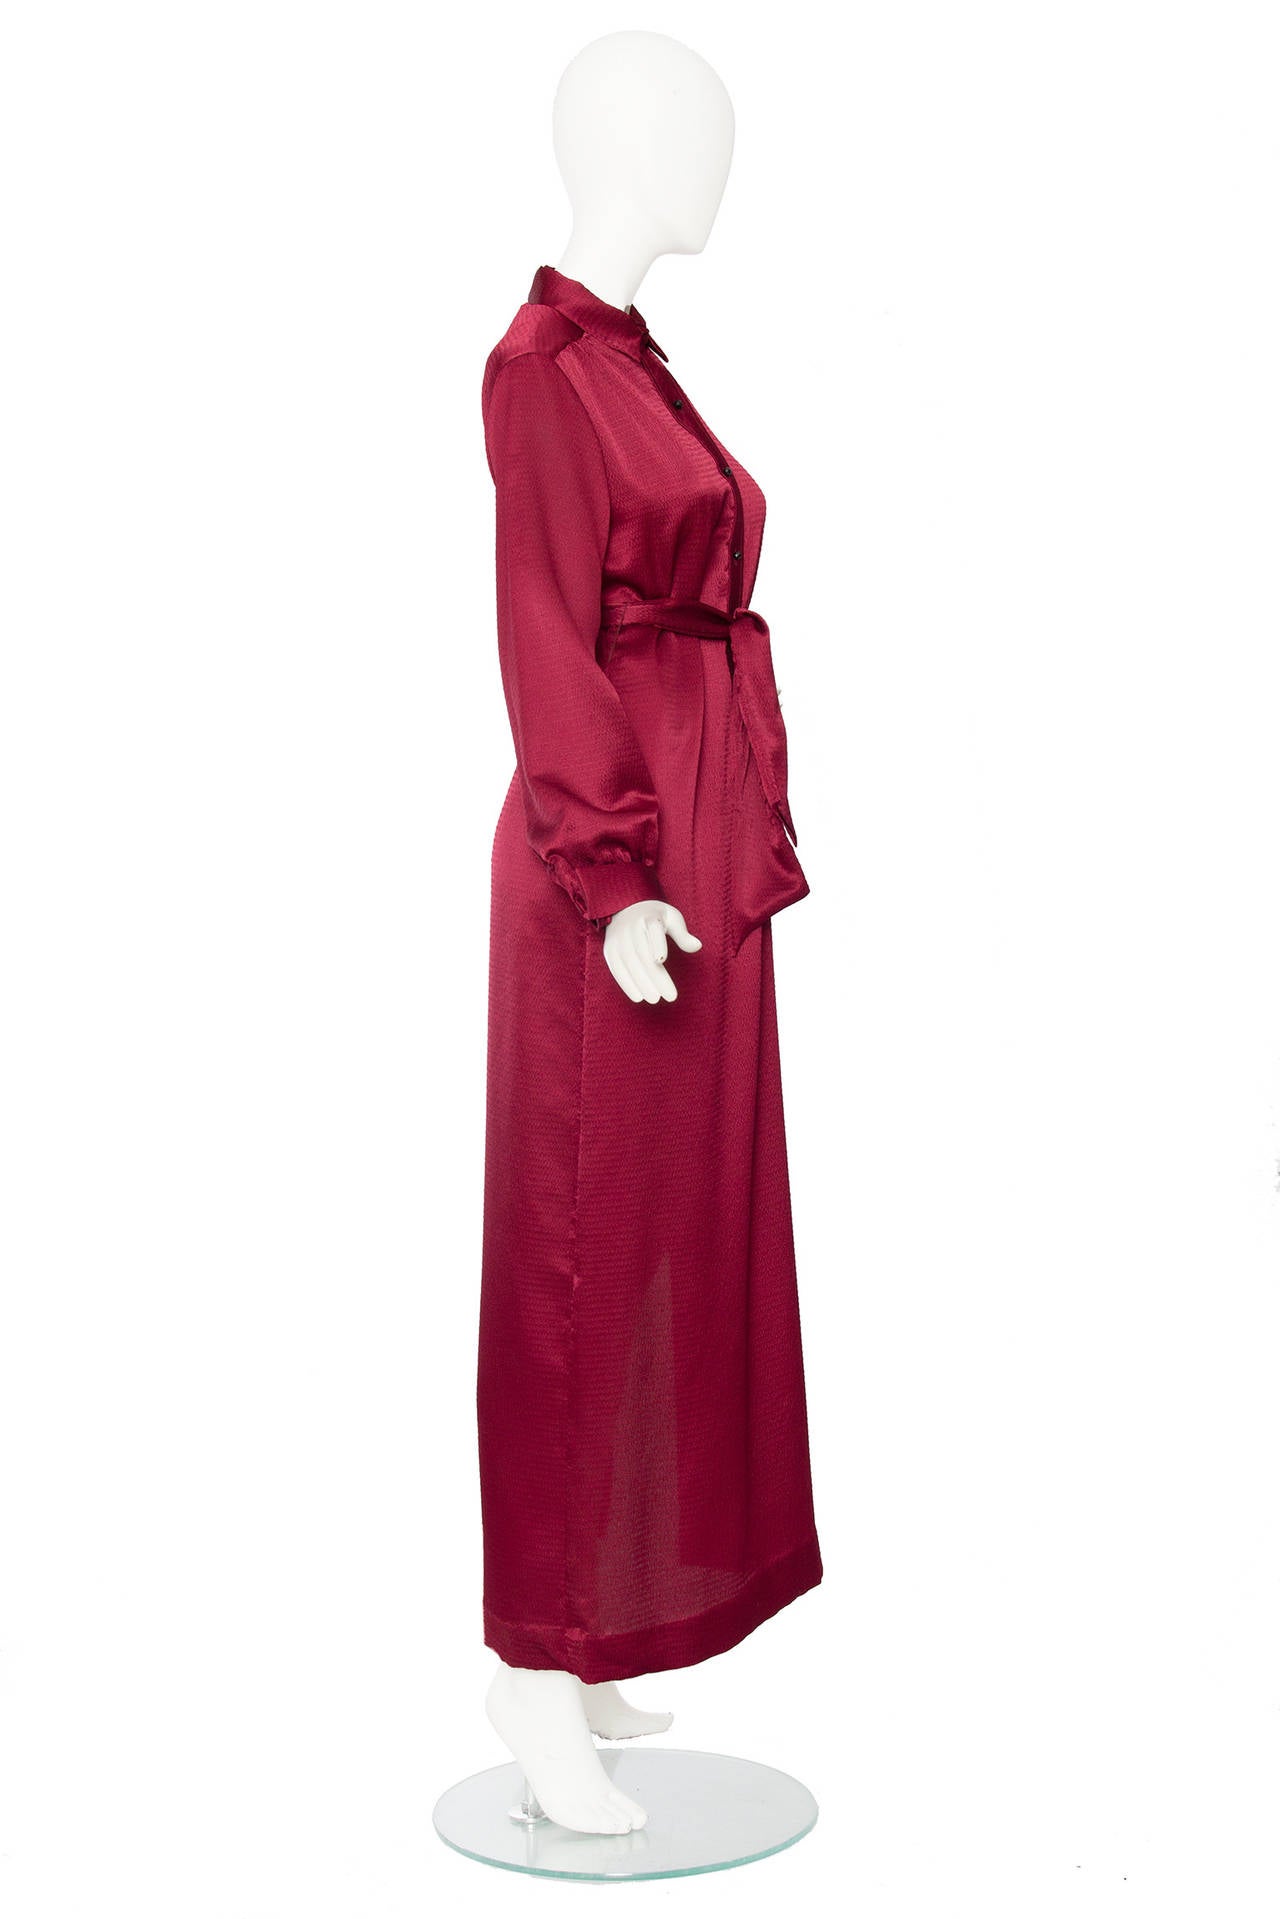 A 1970s Lanvin burgundy silk dress with long sleeves, a button down front with contrasting black buttons and a matching belt to tie around the waist. The long fitted skirt has a 50s long slit and one buttoned cuffs. 

The size of the dress